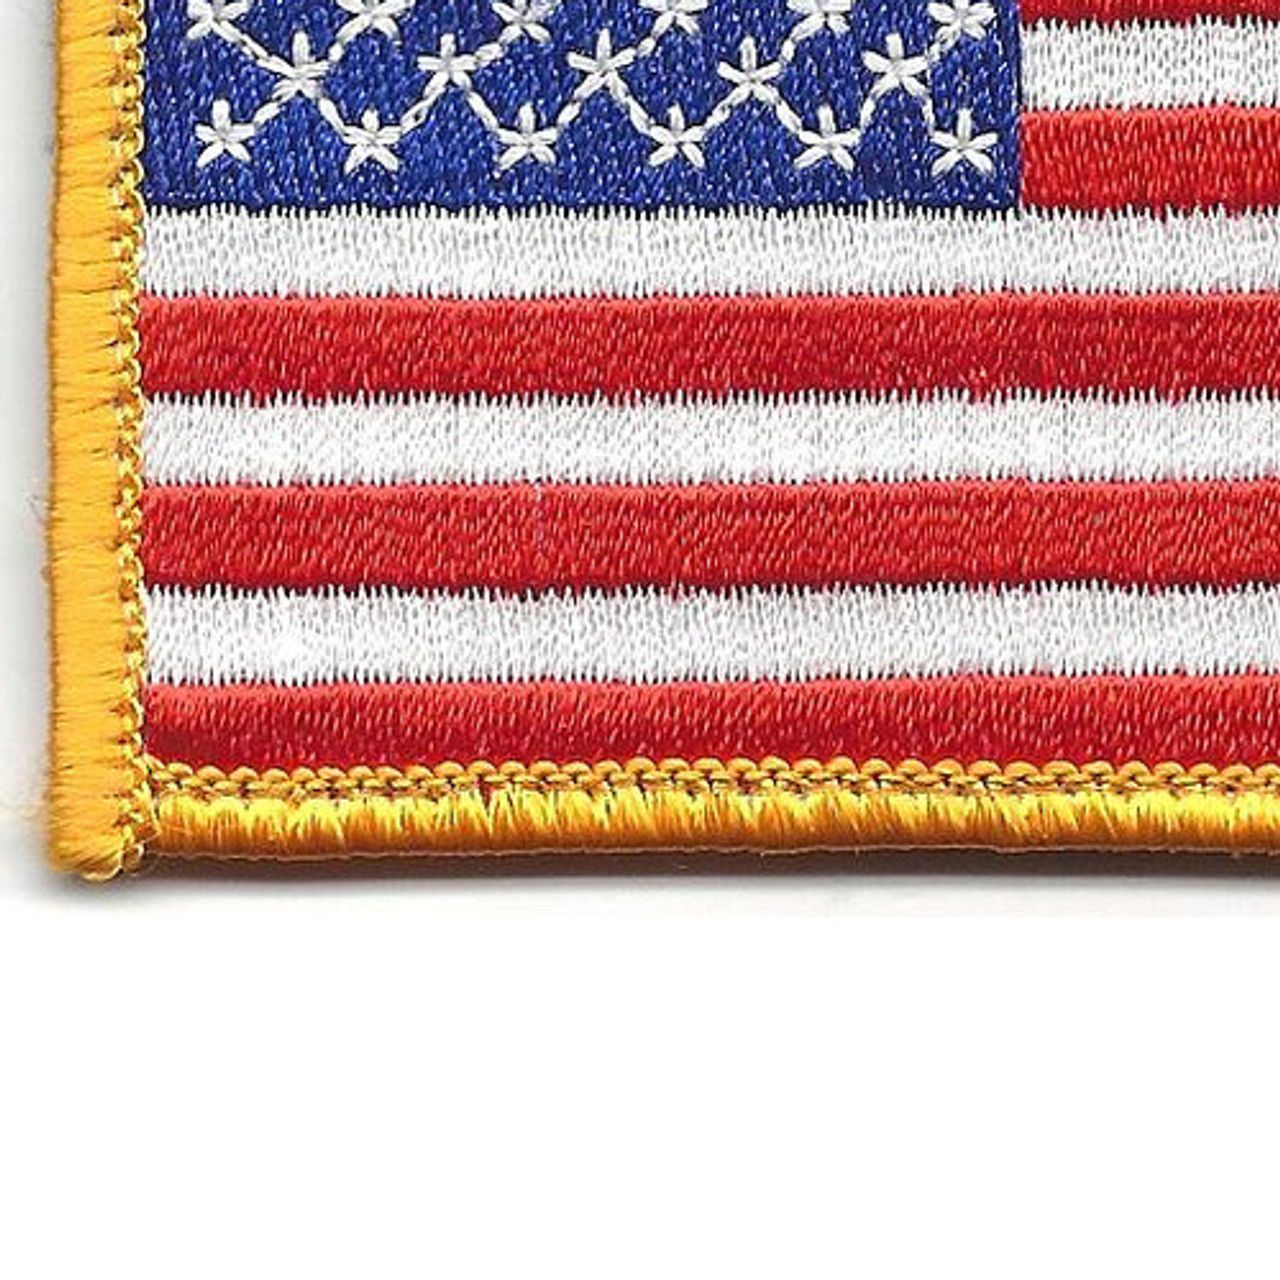 Covert Black Ops USA American Flag Patch for VELCRO® BRAND Hook Fastener